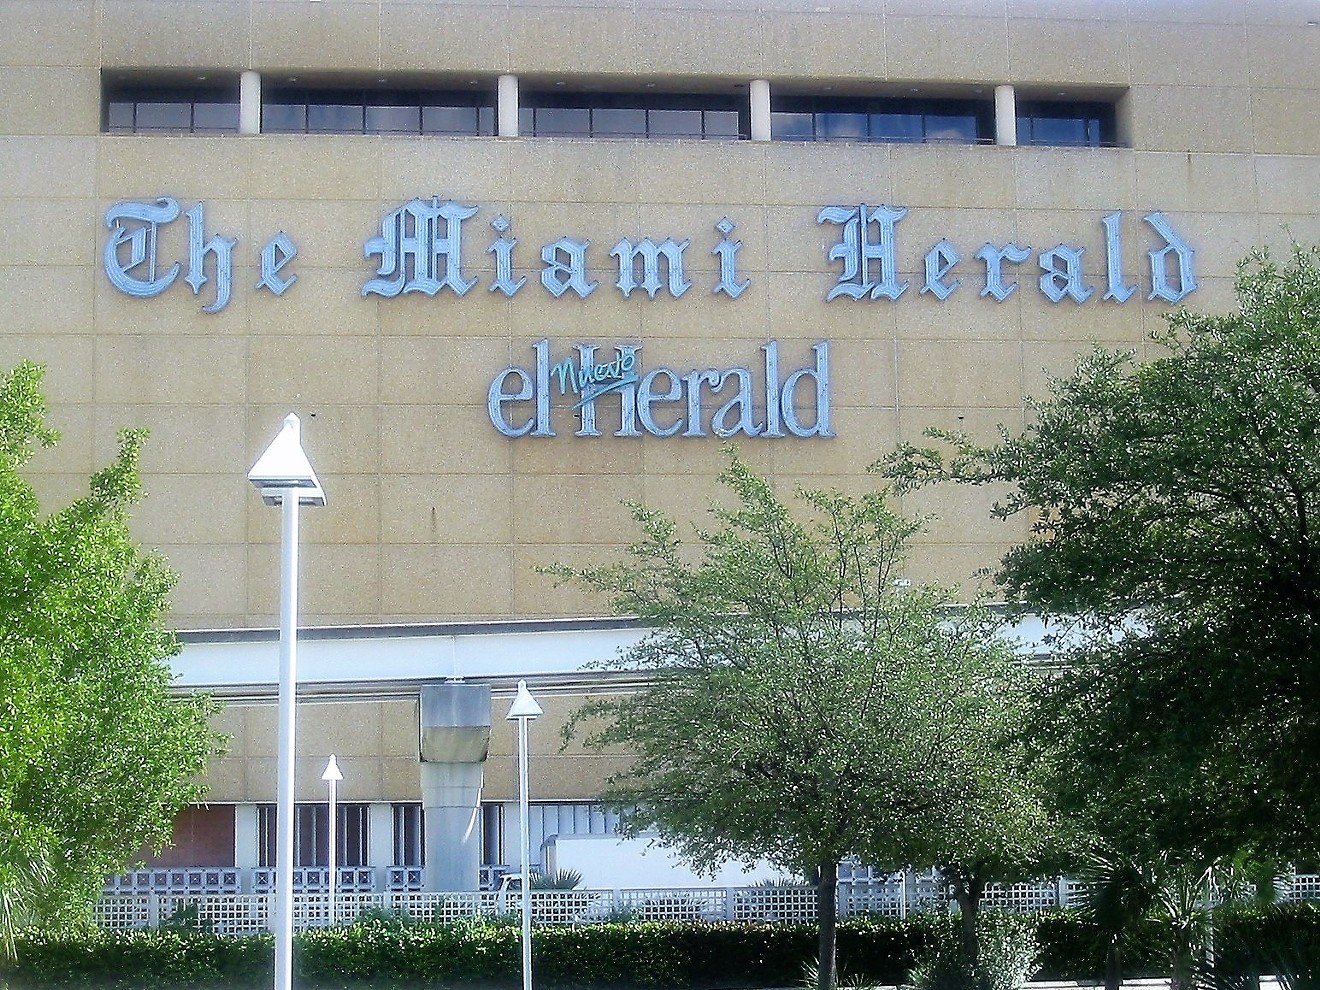 The former Miami Herald building on Biscayne Bay.